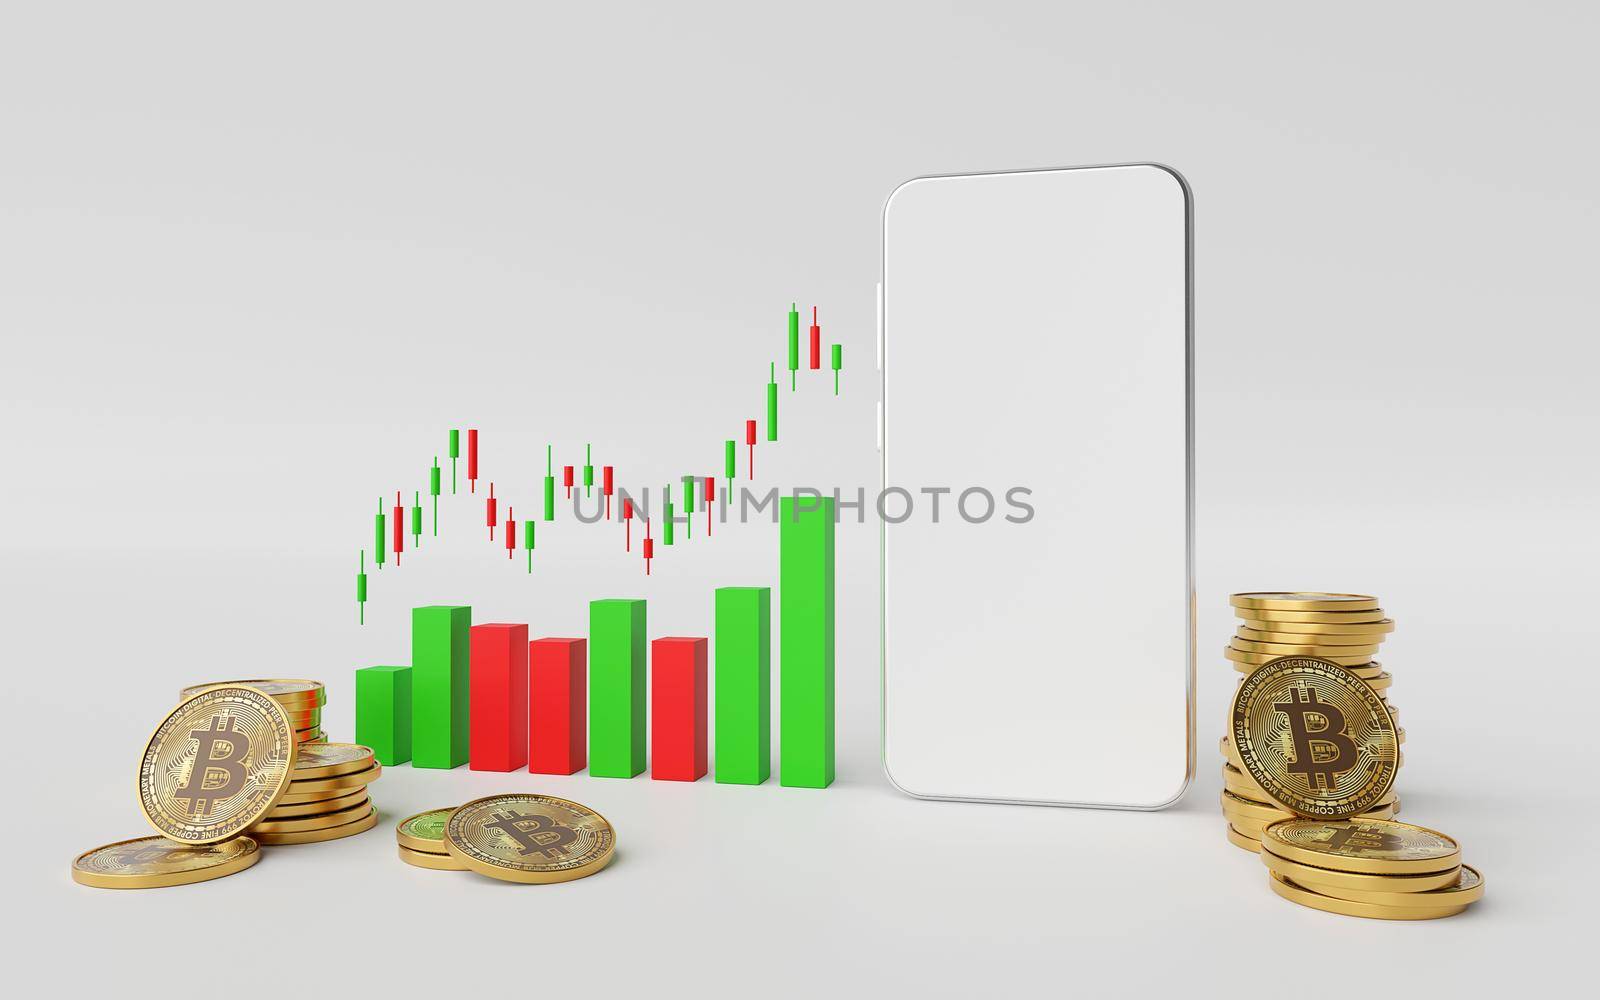 Investment concept, Mockup of smartphone with candle stick graph chart of stock market cryptocurrency trading up, 3d rendering by nutzchotwarut